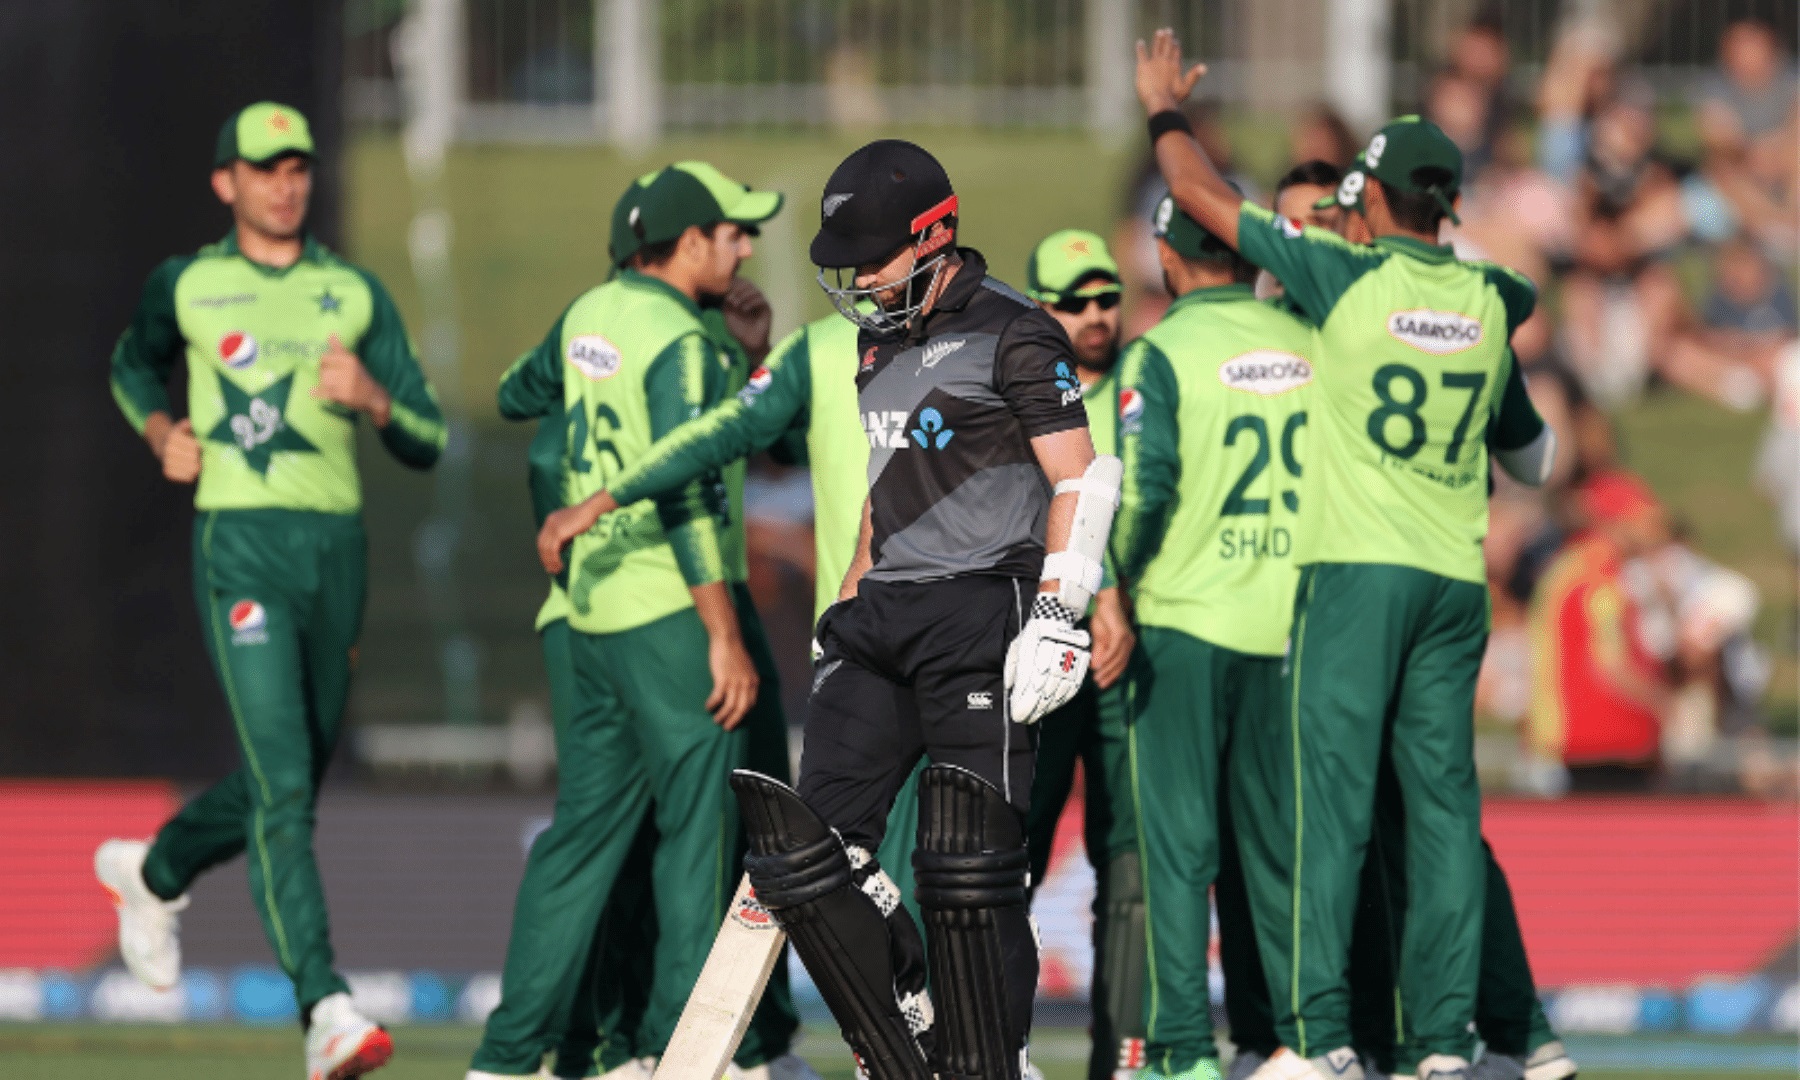 Fans are not permitted to attend the Pak vs. New Zealand warm-up match in Hyderabad, according to the BCCI. teluguvoice